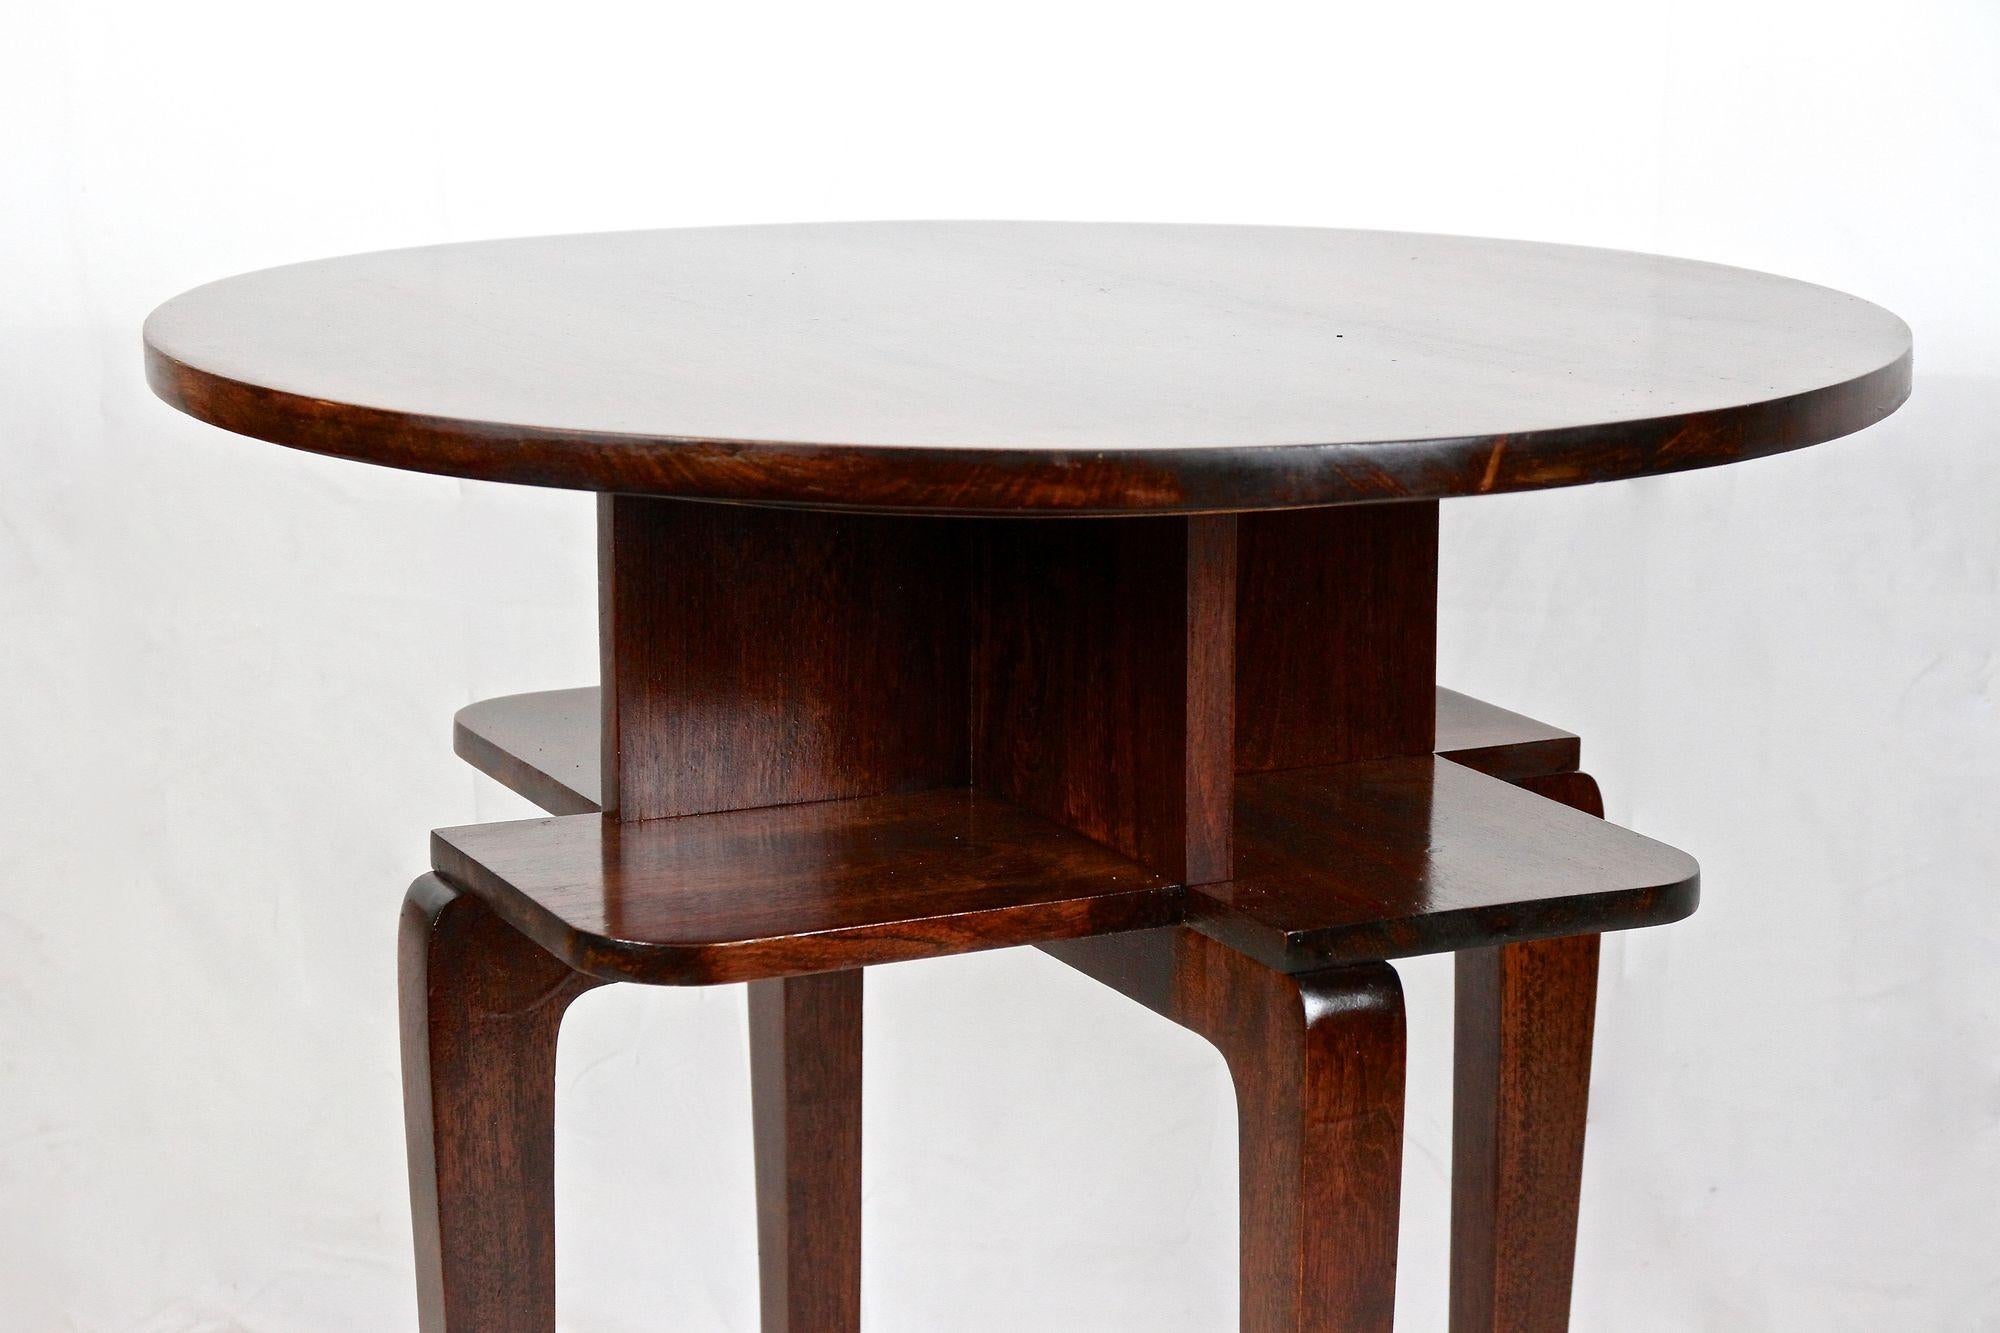 Polished Round Art Deco Bentwood Side Table/ Coffee Table, Mahogany Style, AT ca. 1920